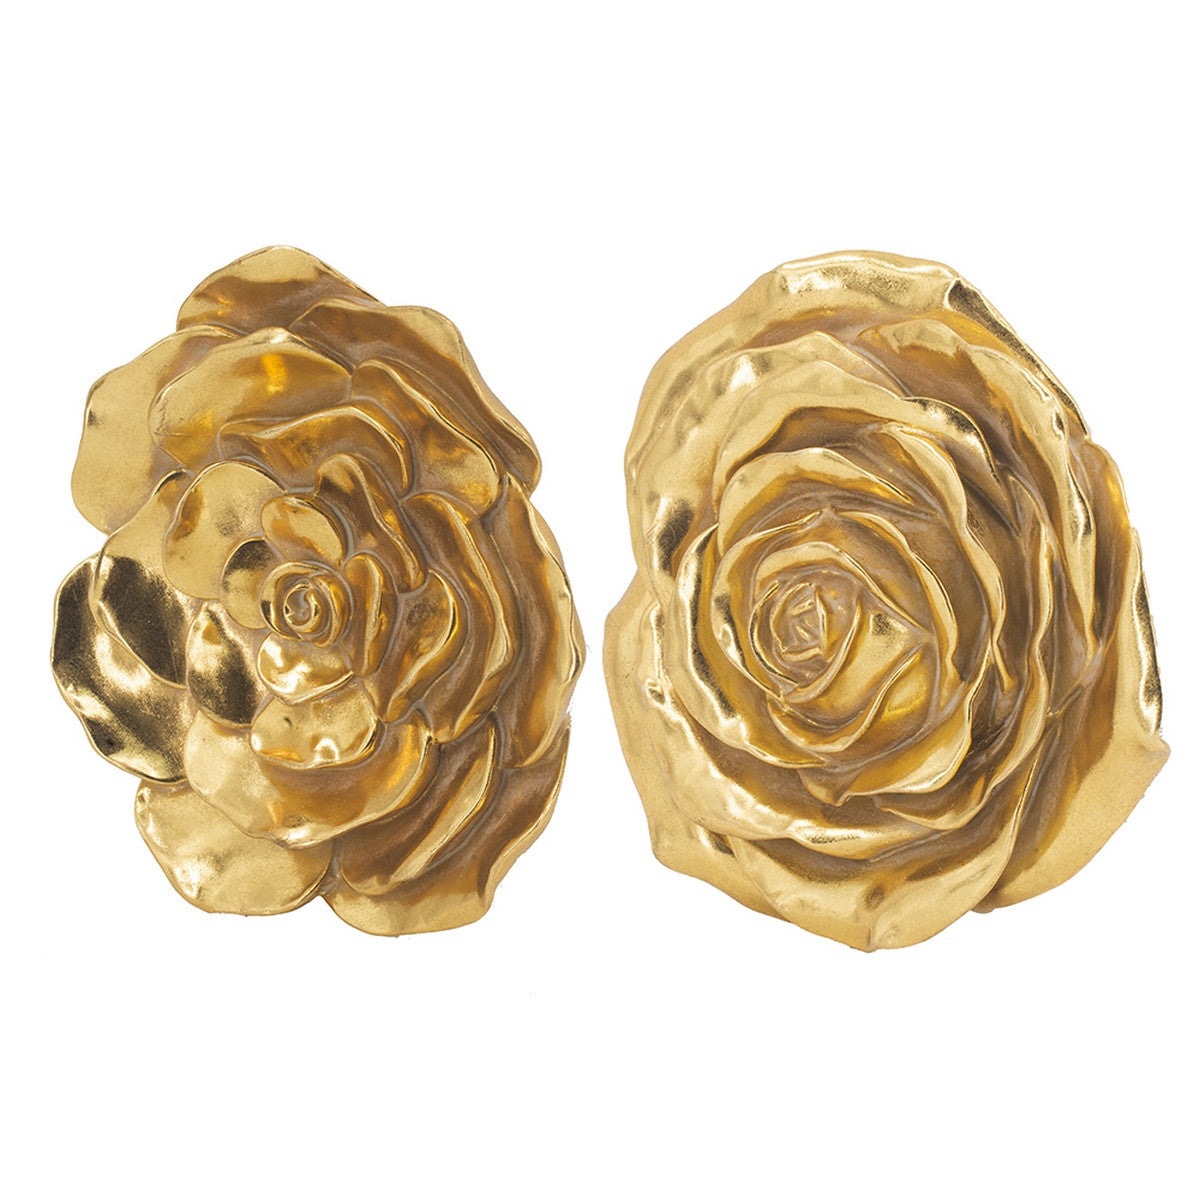 Gold Floral Wall Hanging Plaque - set of 2